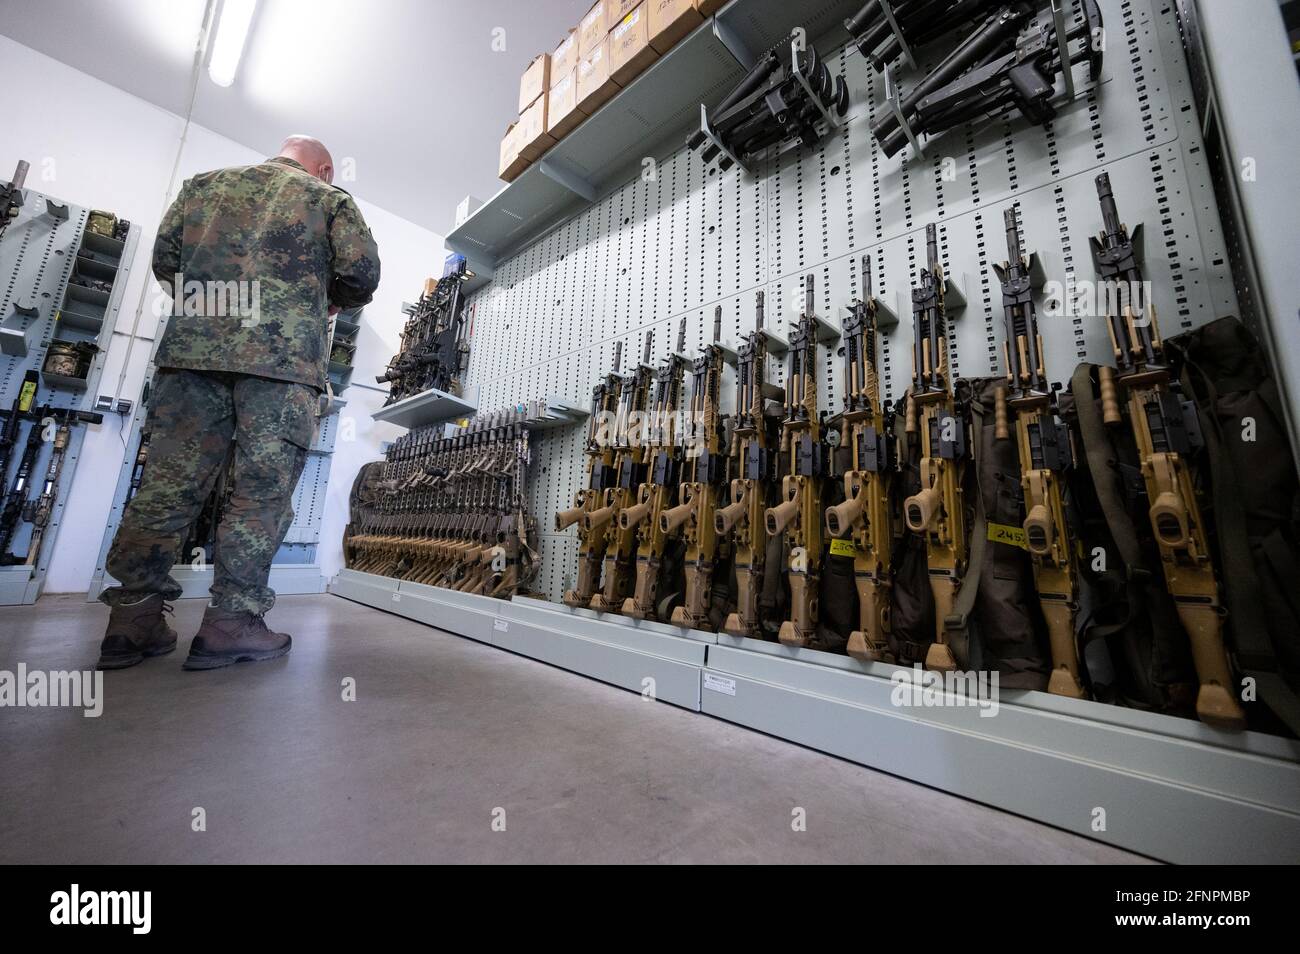 Calw, Germany. 11th May, 2021. A member of the support forces of the  Bundeswehr Special Forces